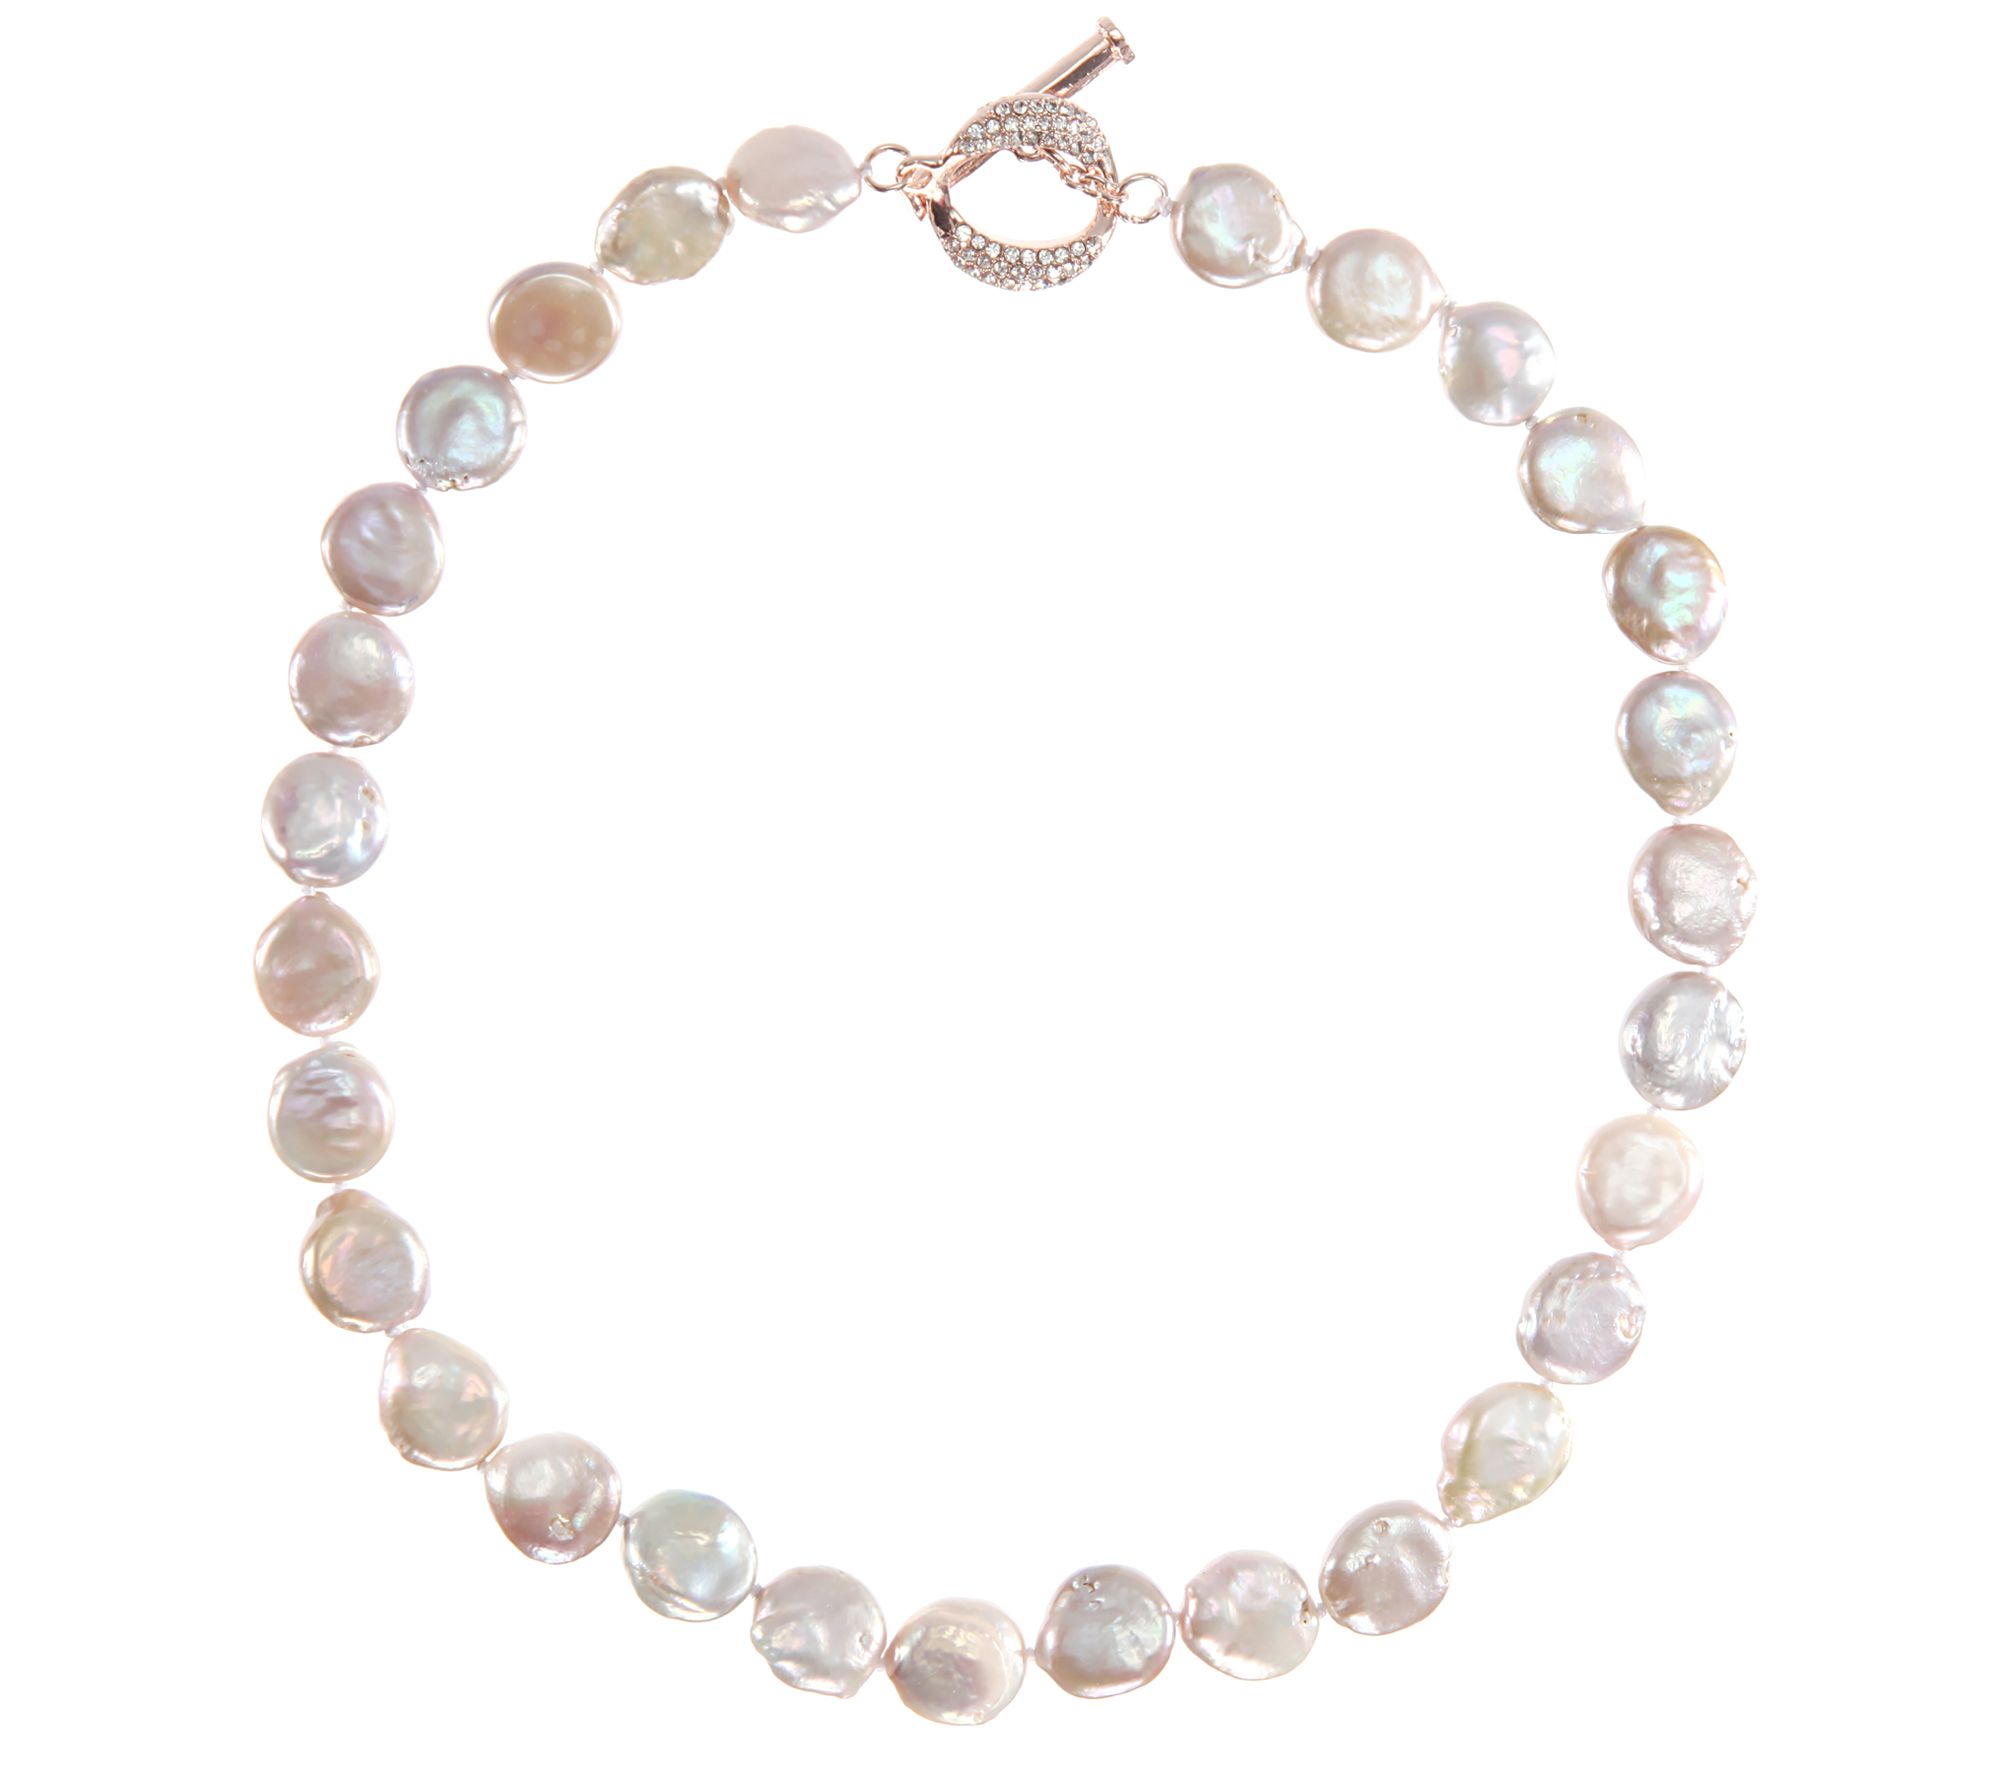 Nina Jewelry 13mm Baroque Coin Pearl Necklace - QVC.com